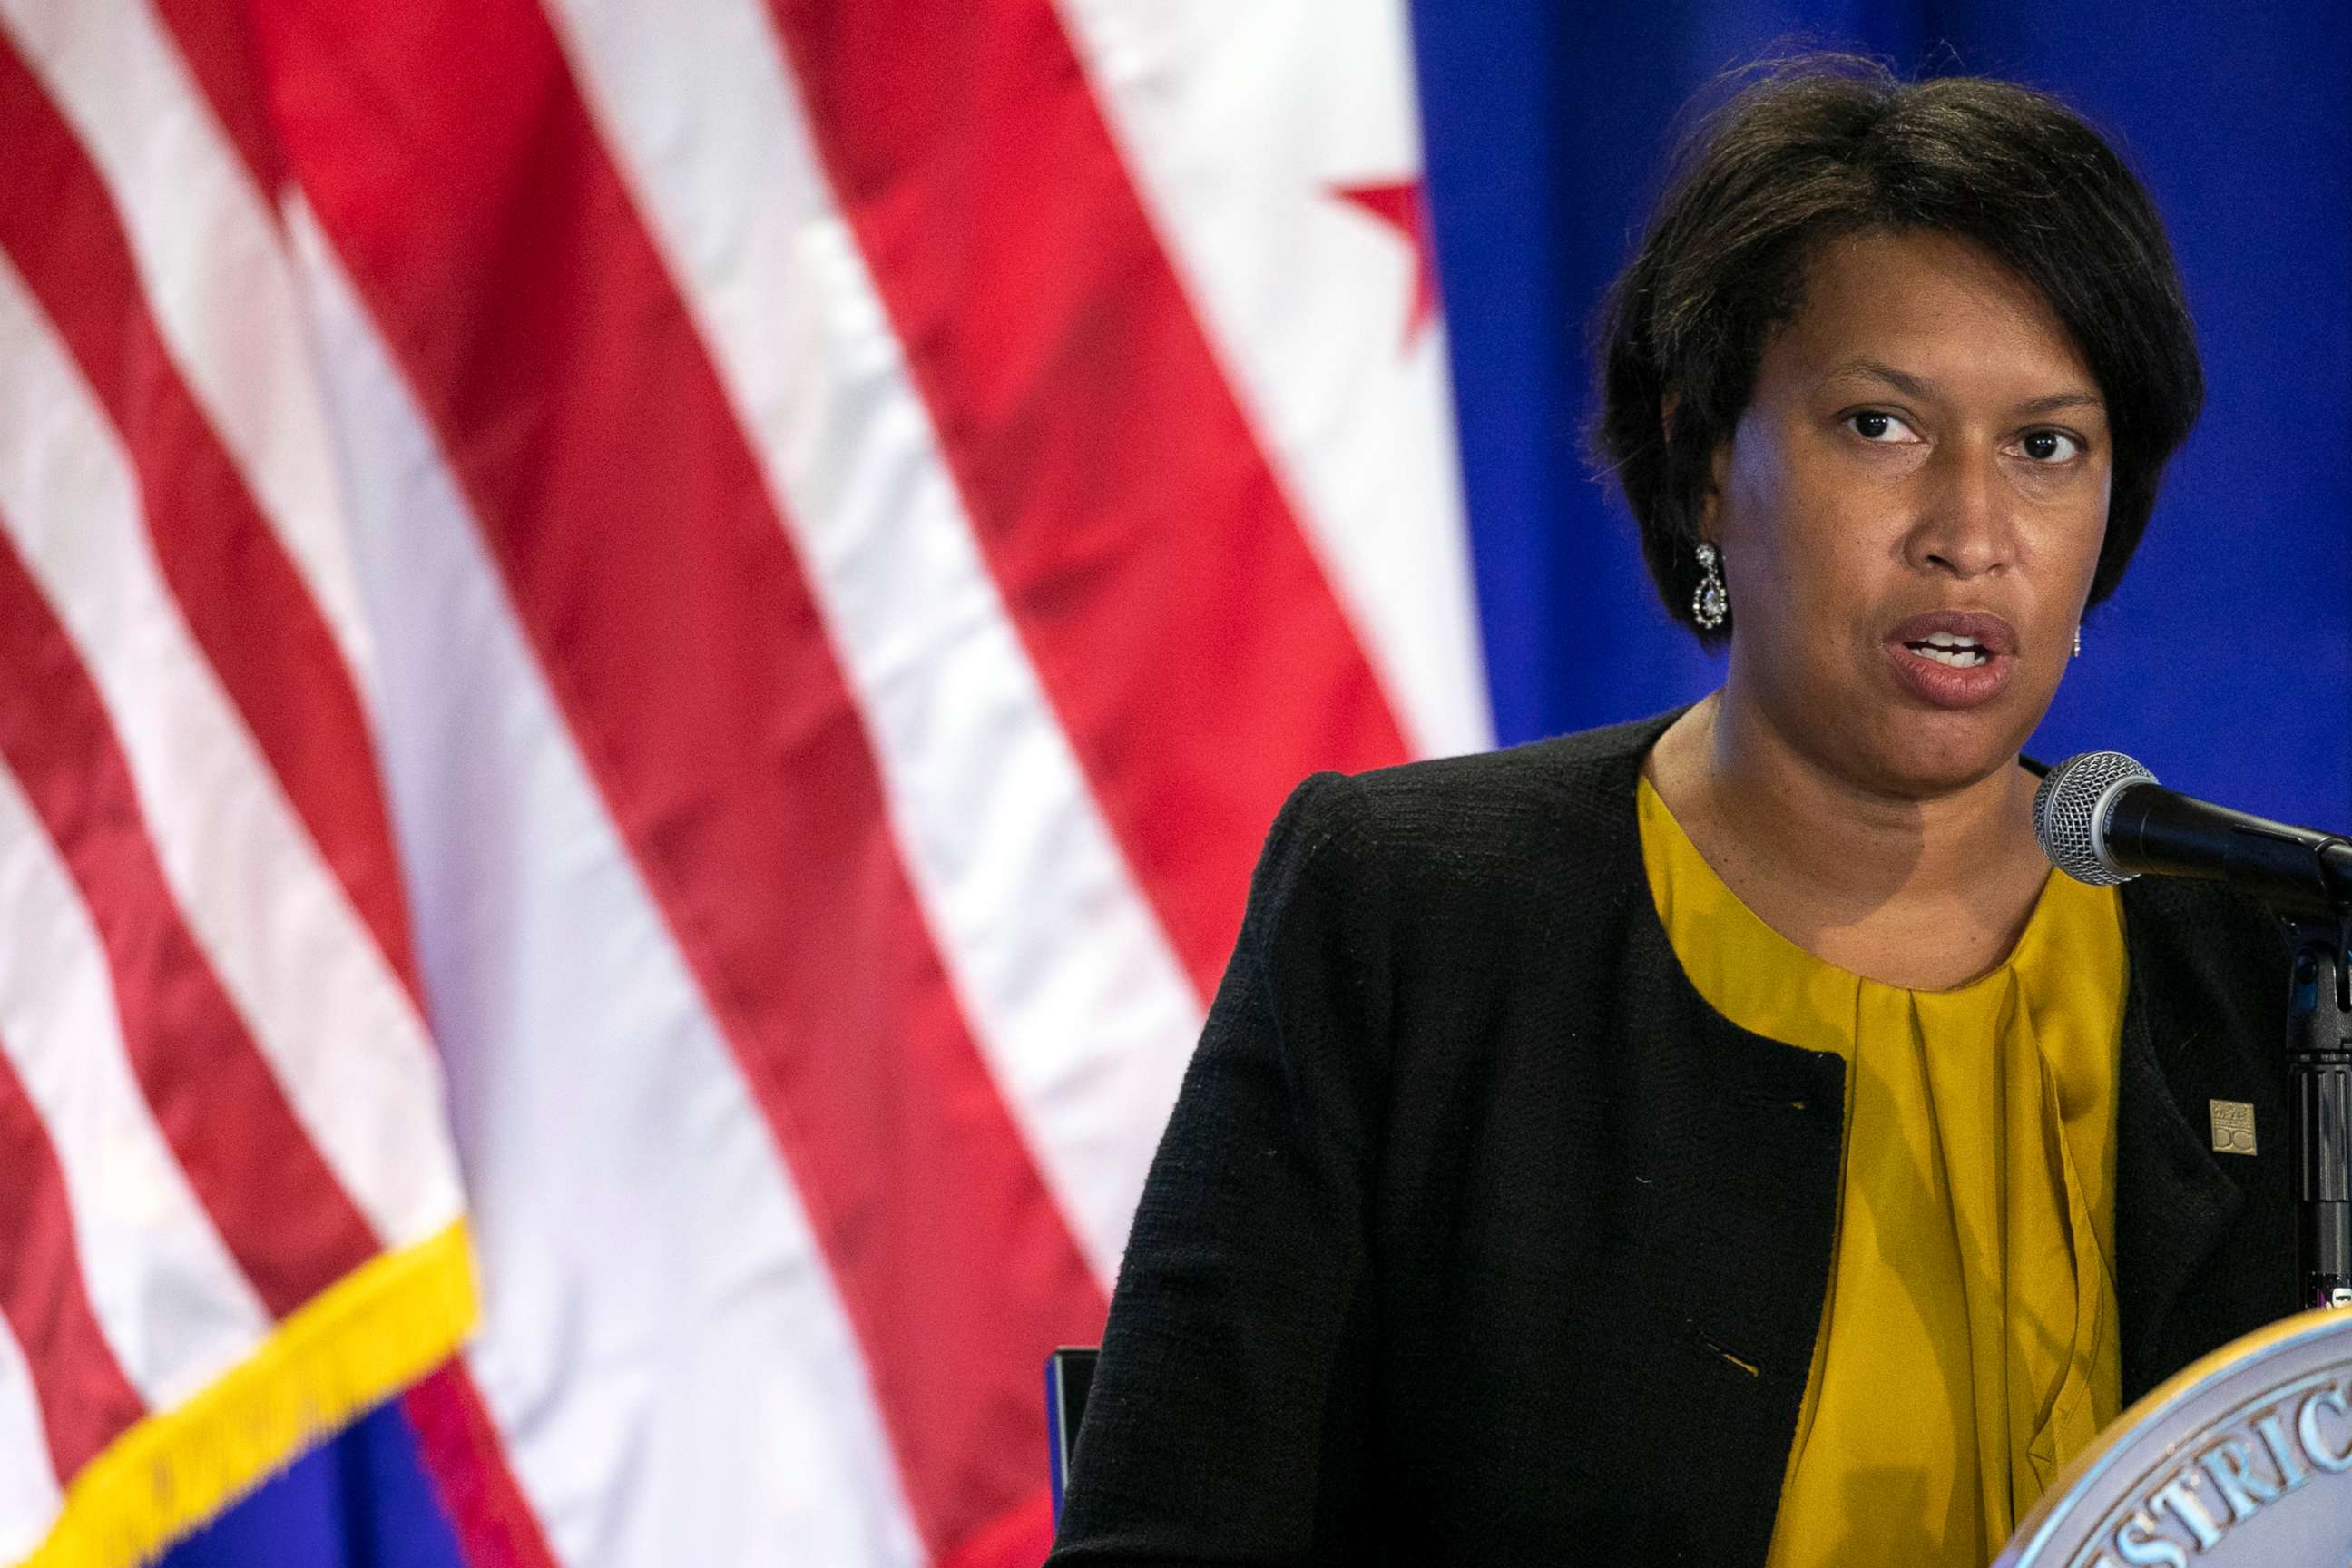 PHOTO: District of Columbia Mayor Muriel Bowser speaks during a news conference on July 30, 2020, in Washington.